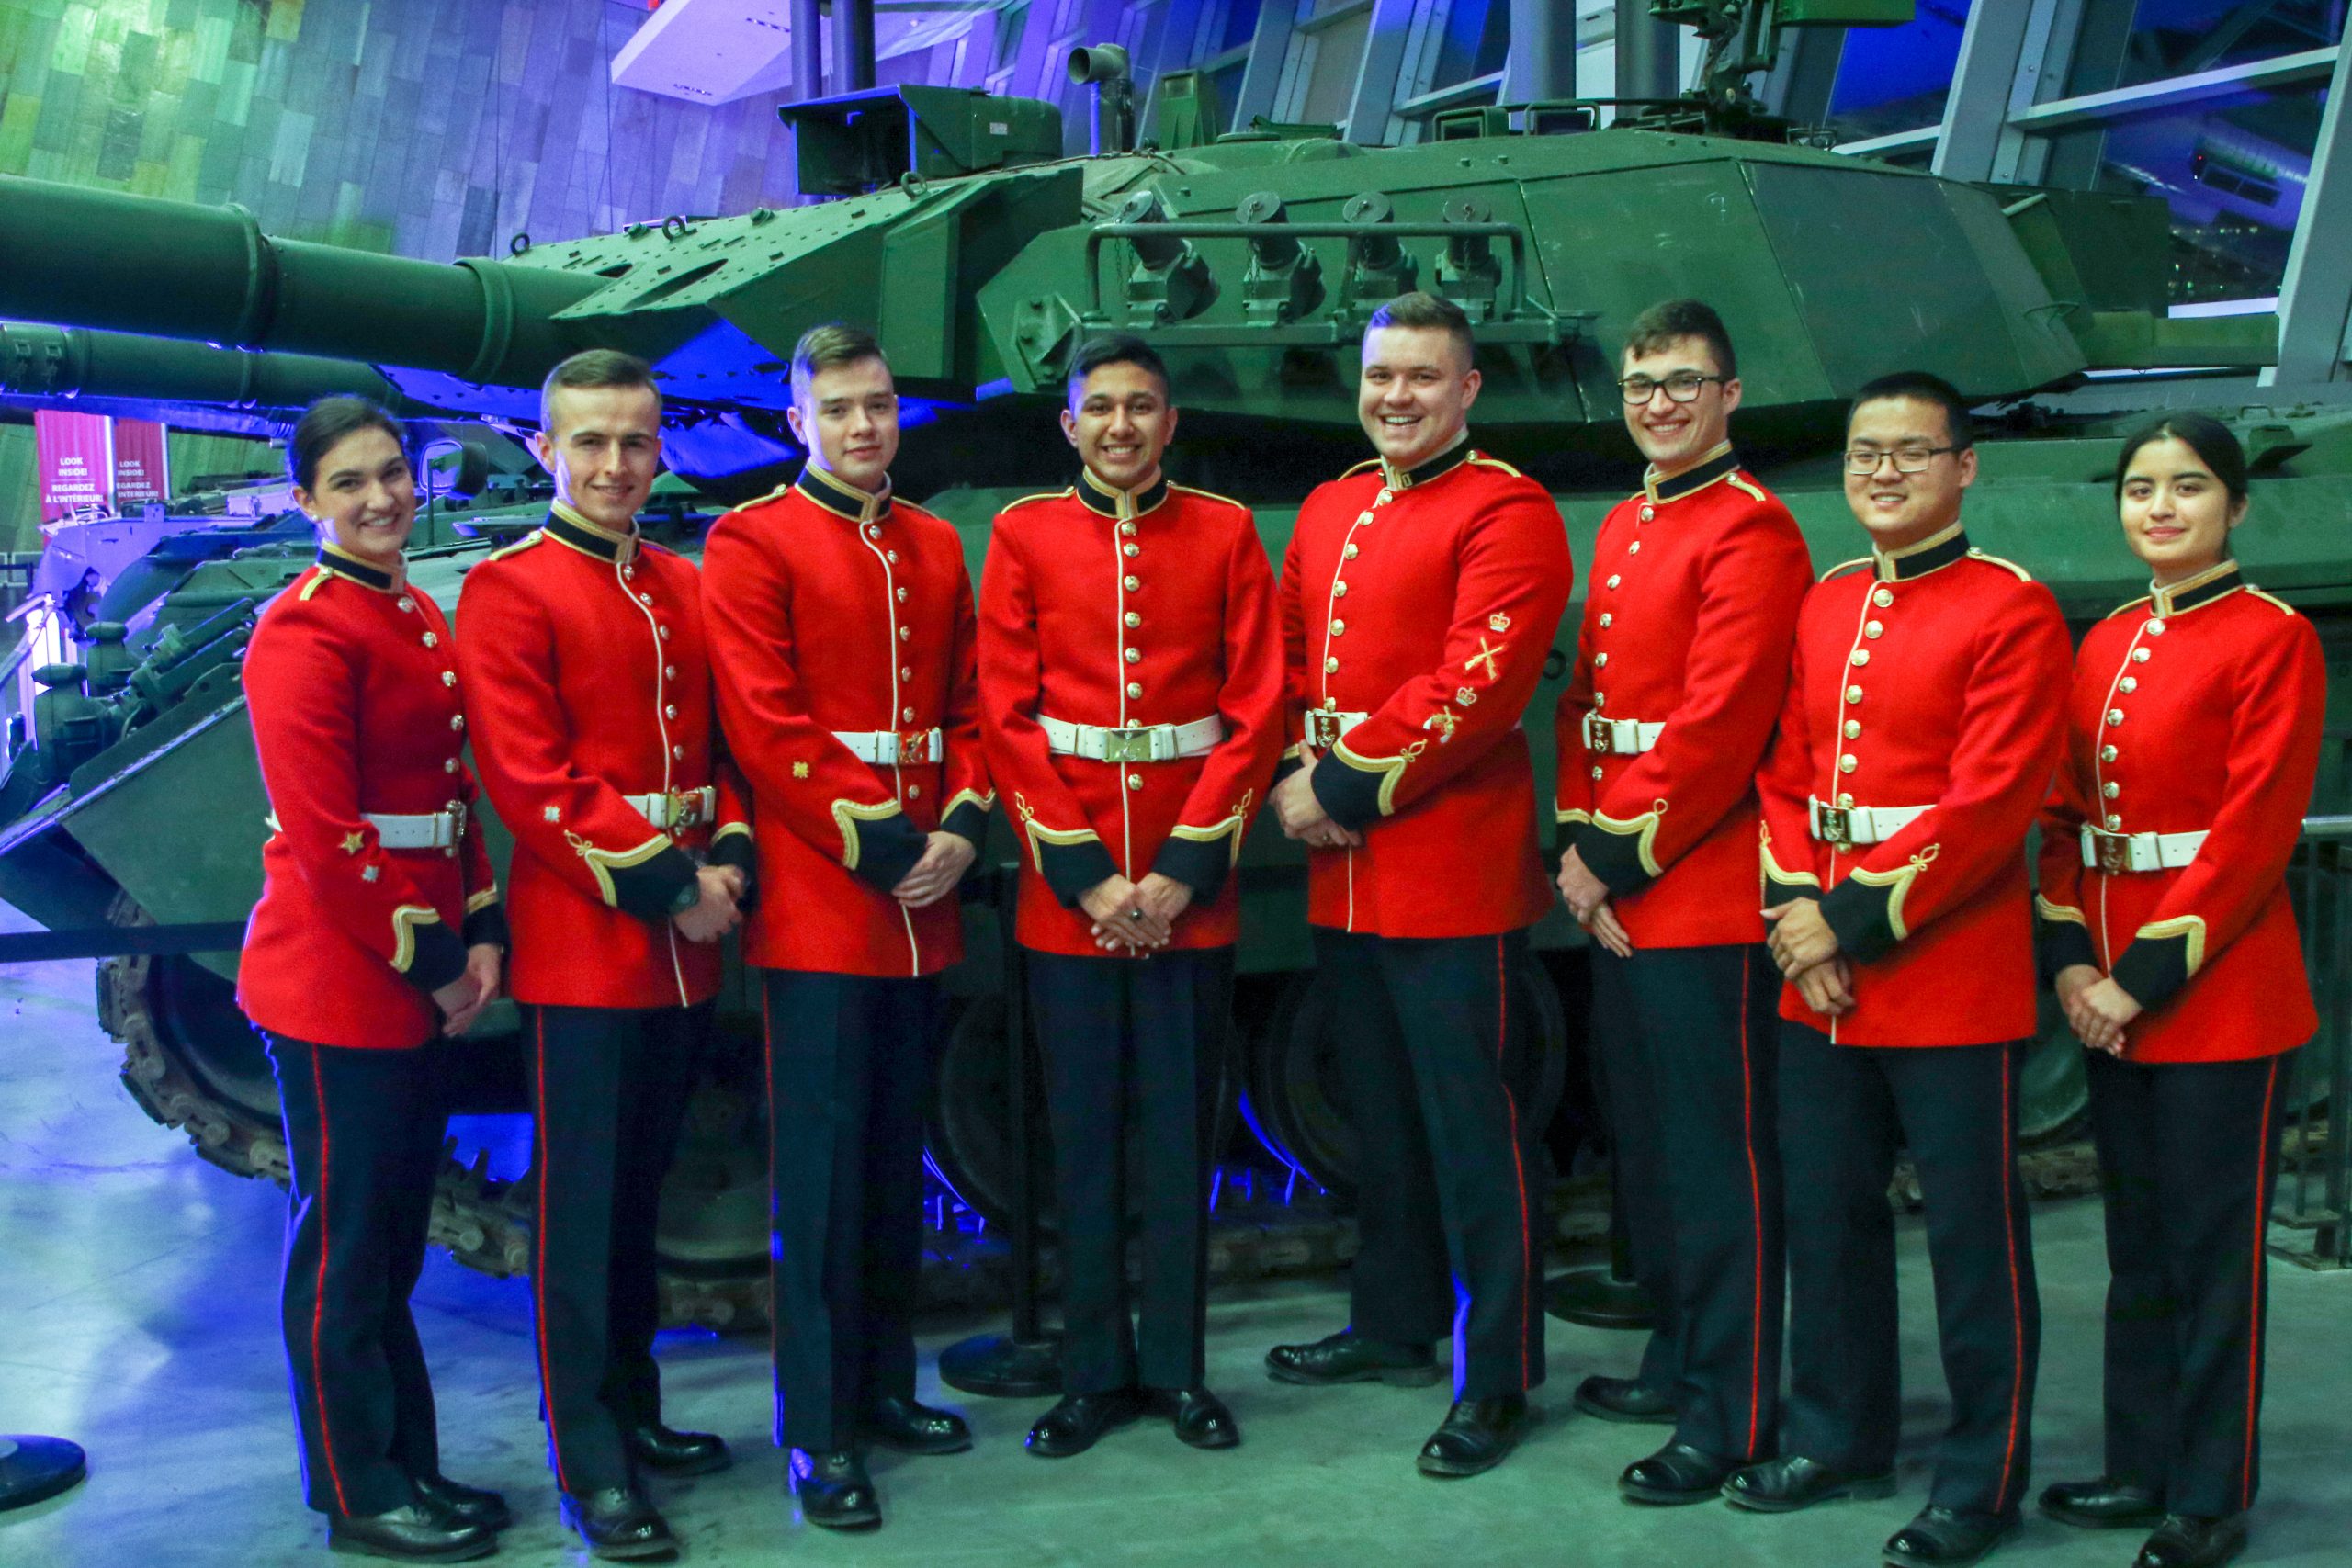 RMC Debate and International Affairs Society in front of tank display